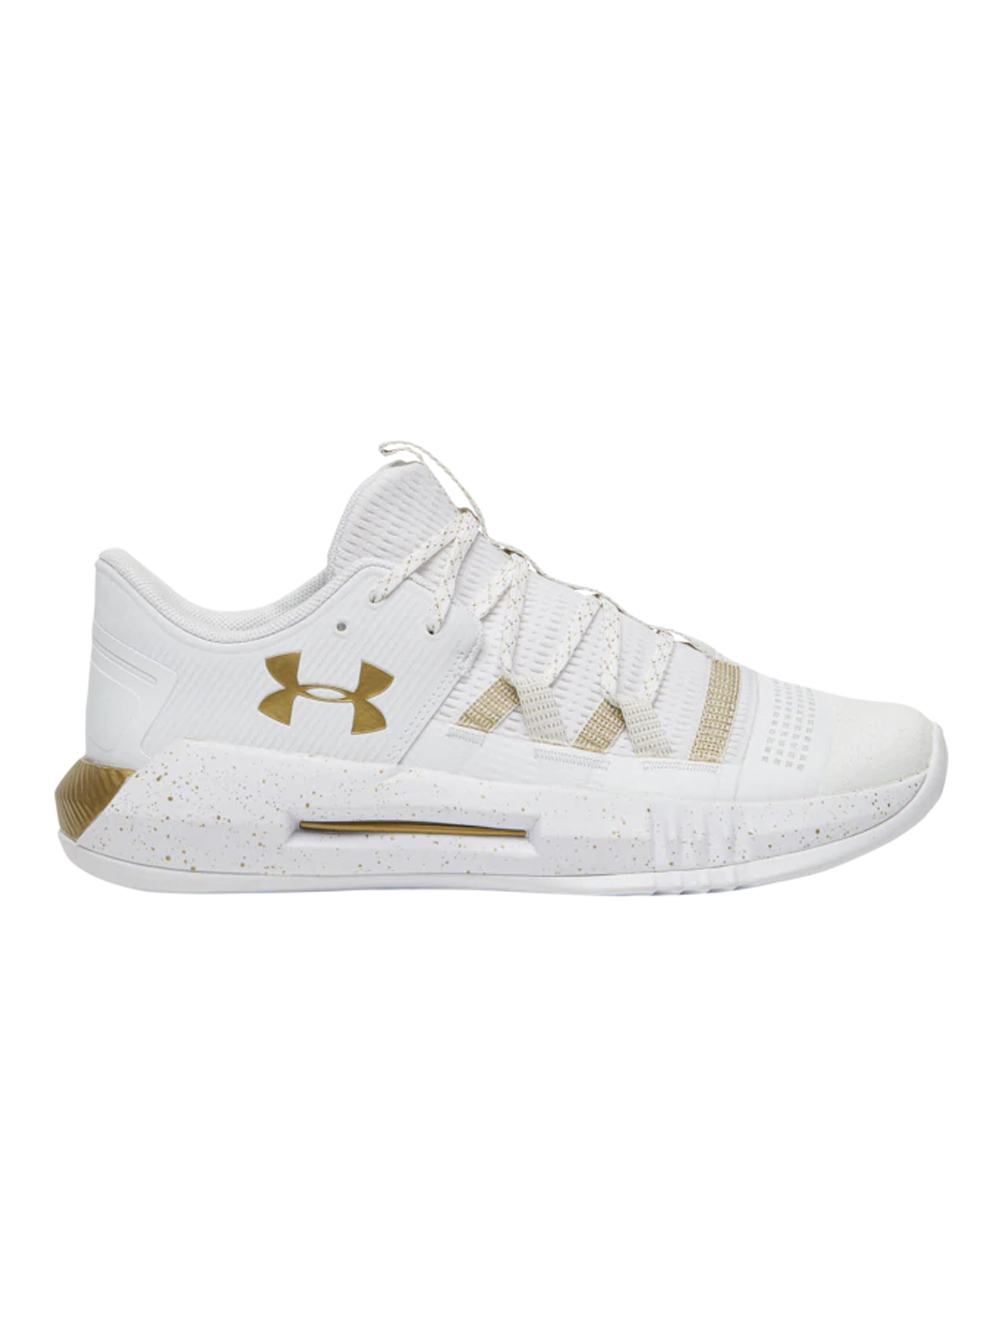 white under armor shoes